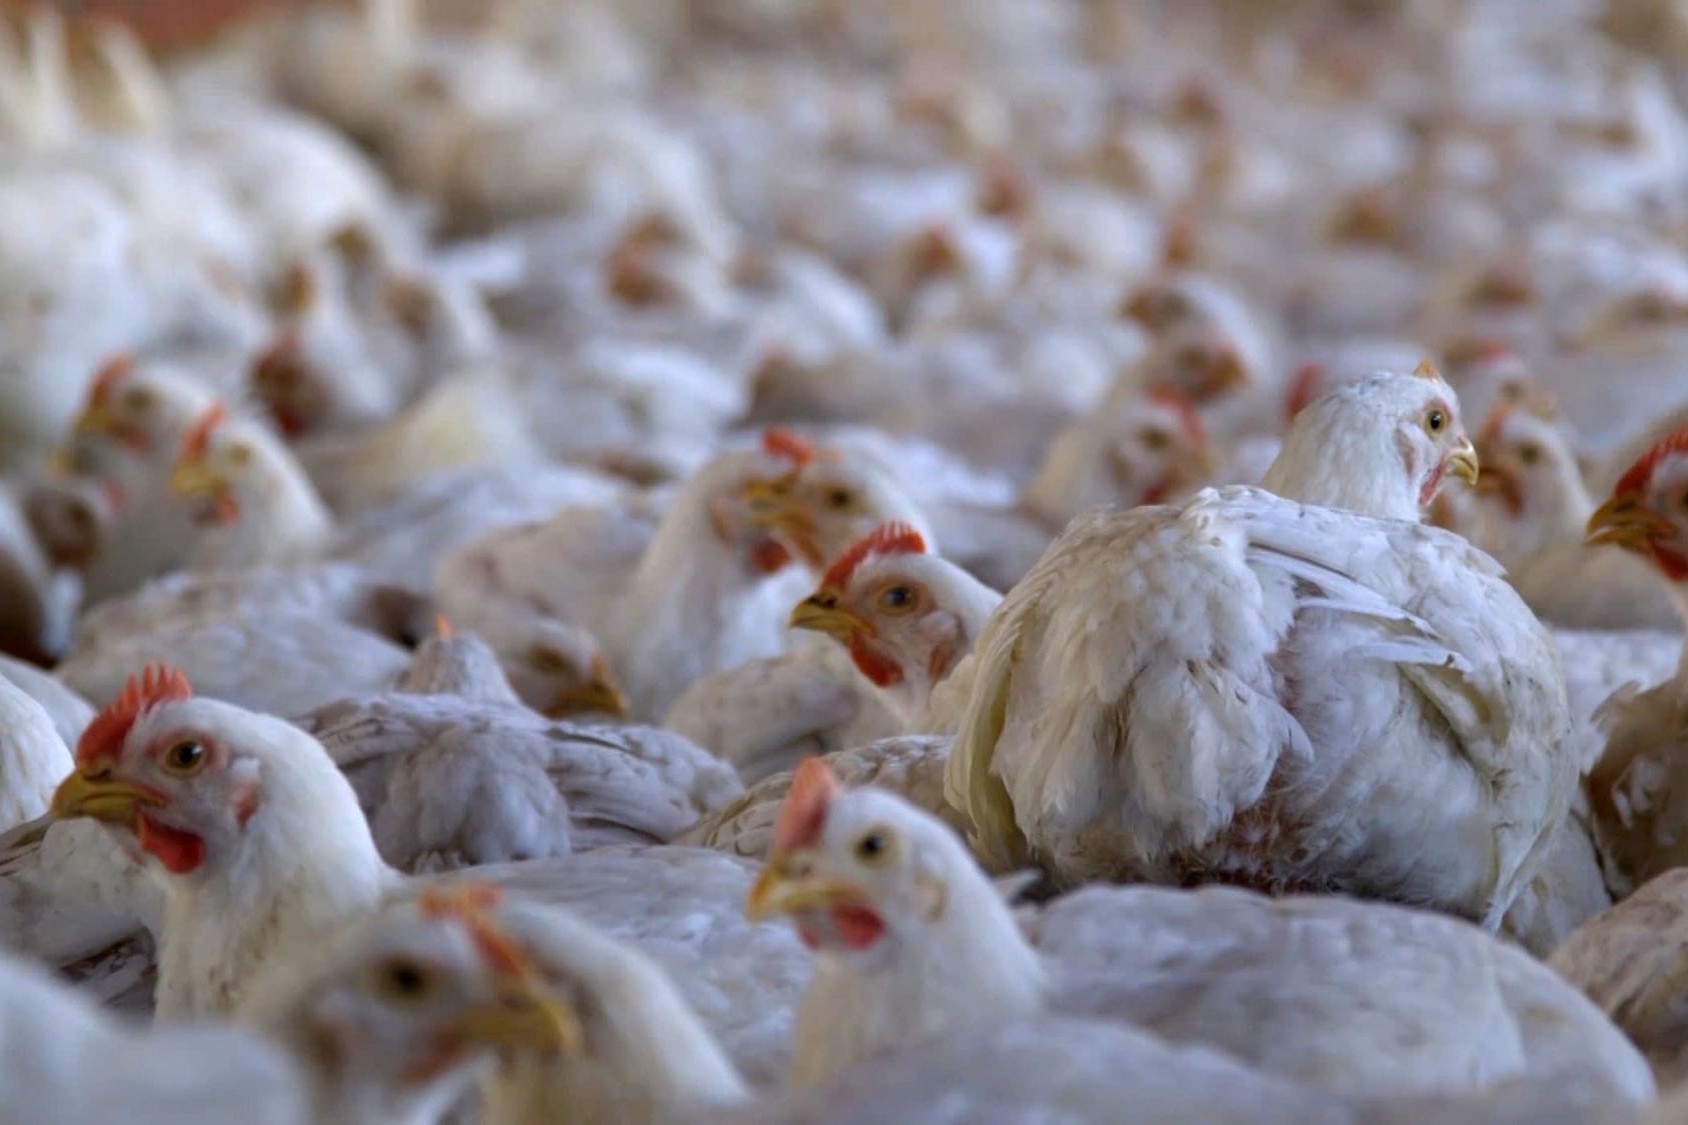 The Pecking Order: Chickens on a factory farm